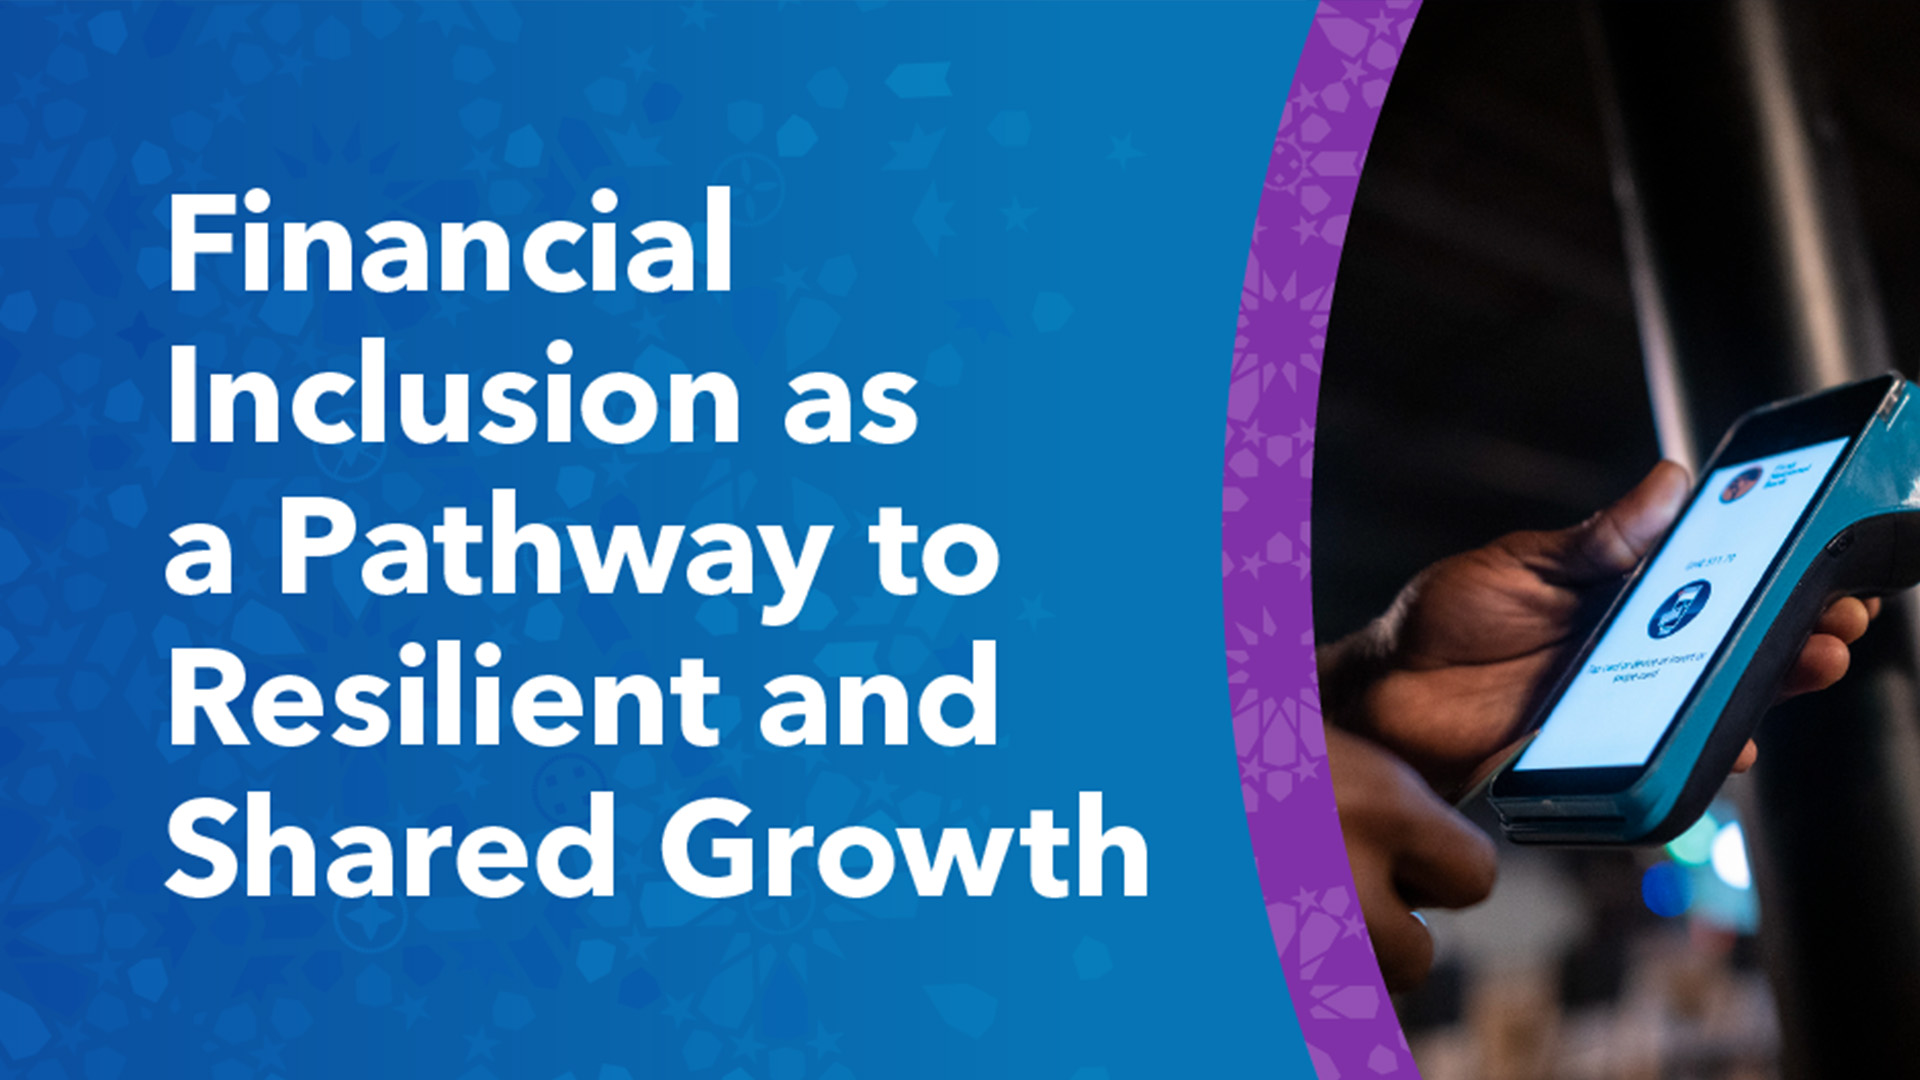 IMF Seminar: Financial Inclusion as a Pathway to Resilient and Shared Growth